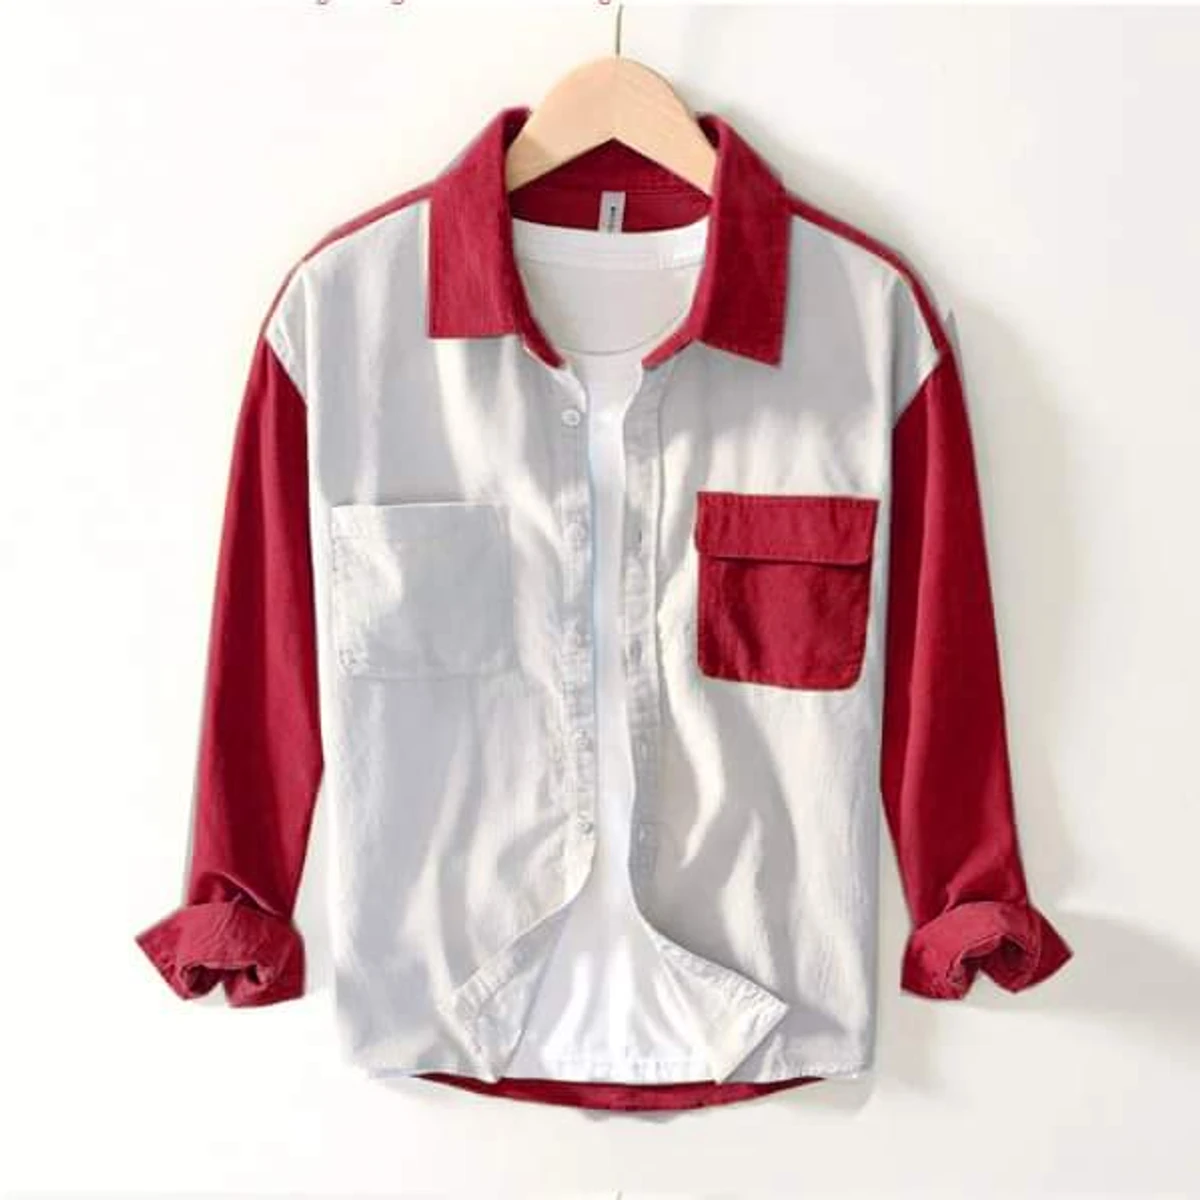 Cotton Rolex Full Sleeve Casual Shirt For Men Red & White-M004